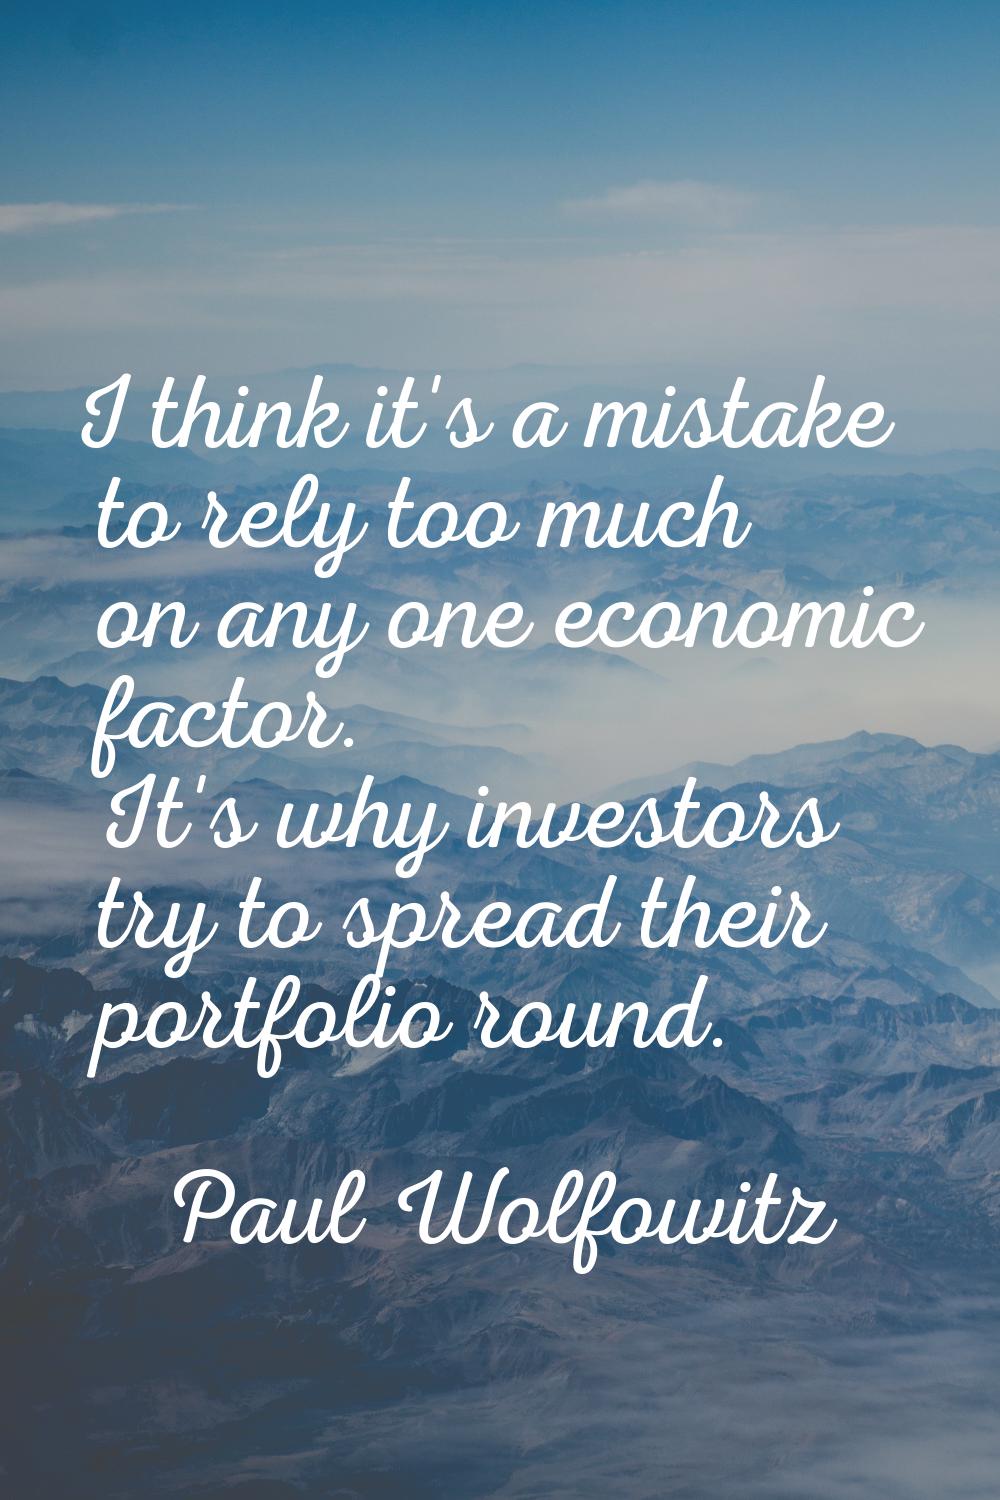 I think it's a mistake to rely too much on any one economic factor. It's why investors try to sprea